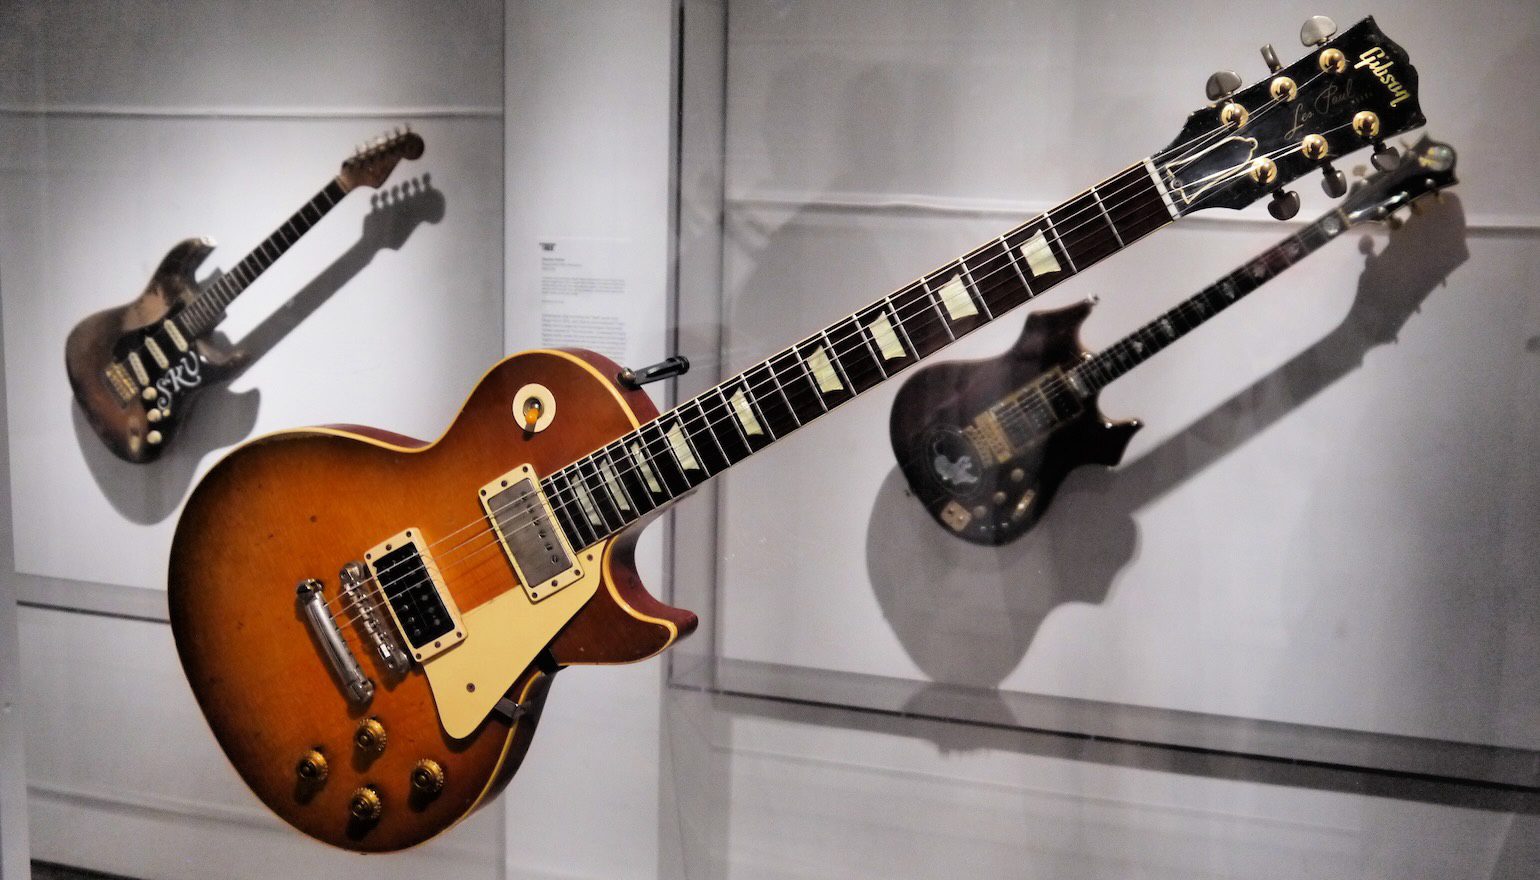 Jimmy Page's 1959 Gibson Les Paul